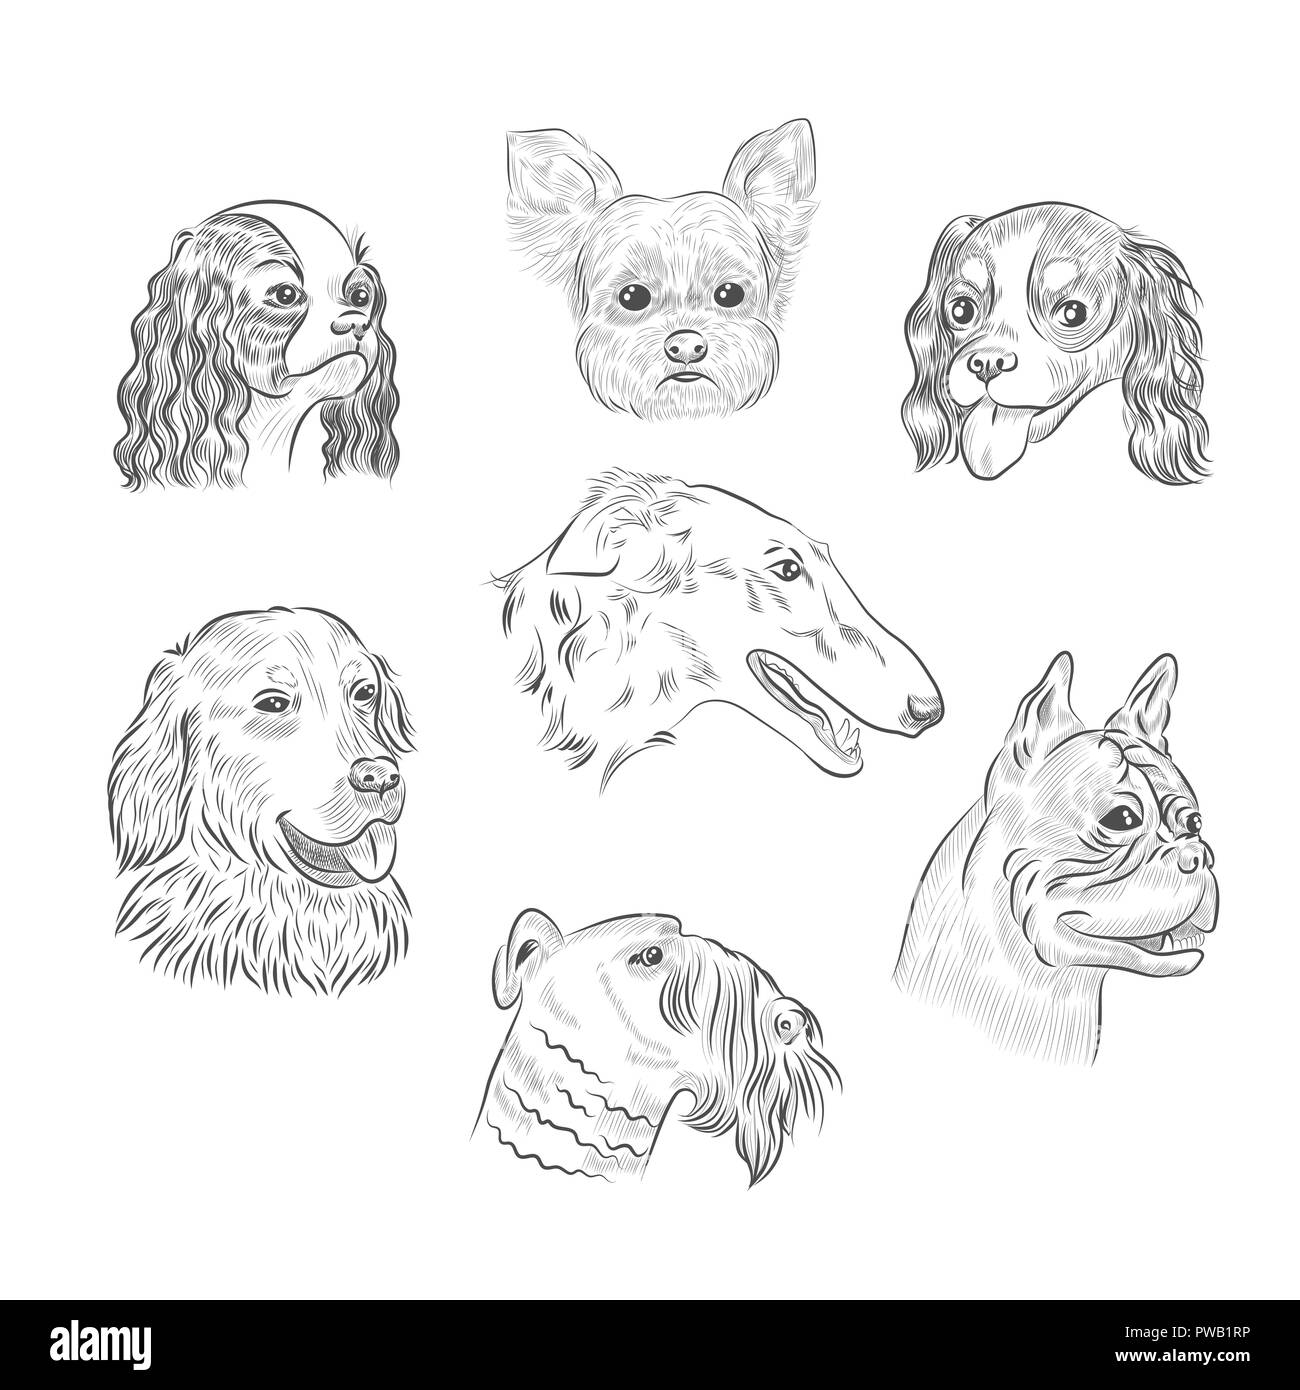 Dog breed portraits hand drawn sketches. Dog heads collection isolated on white background. Stock Vector